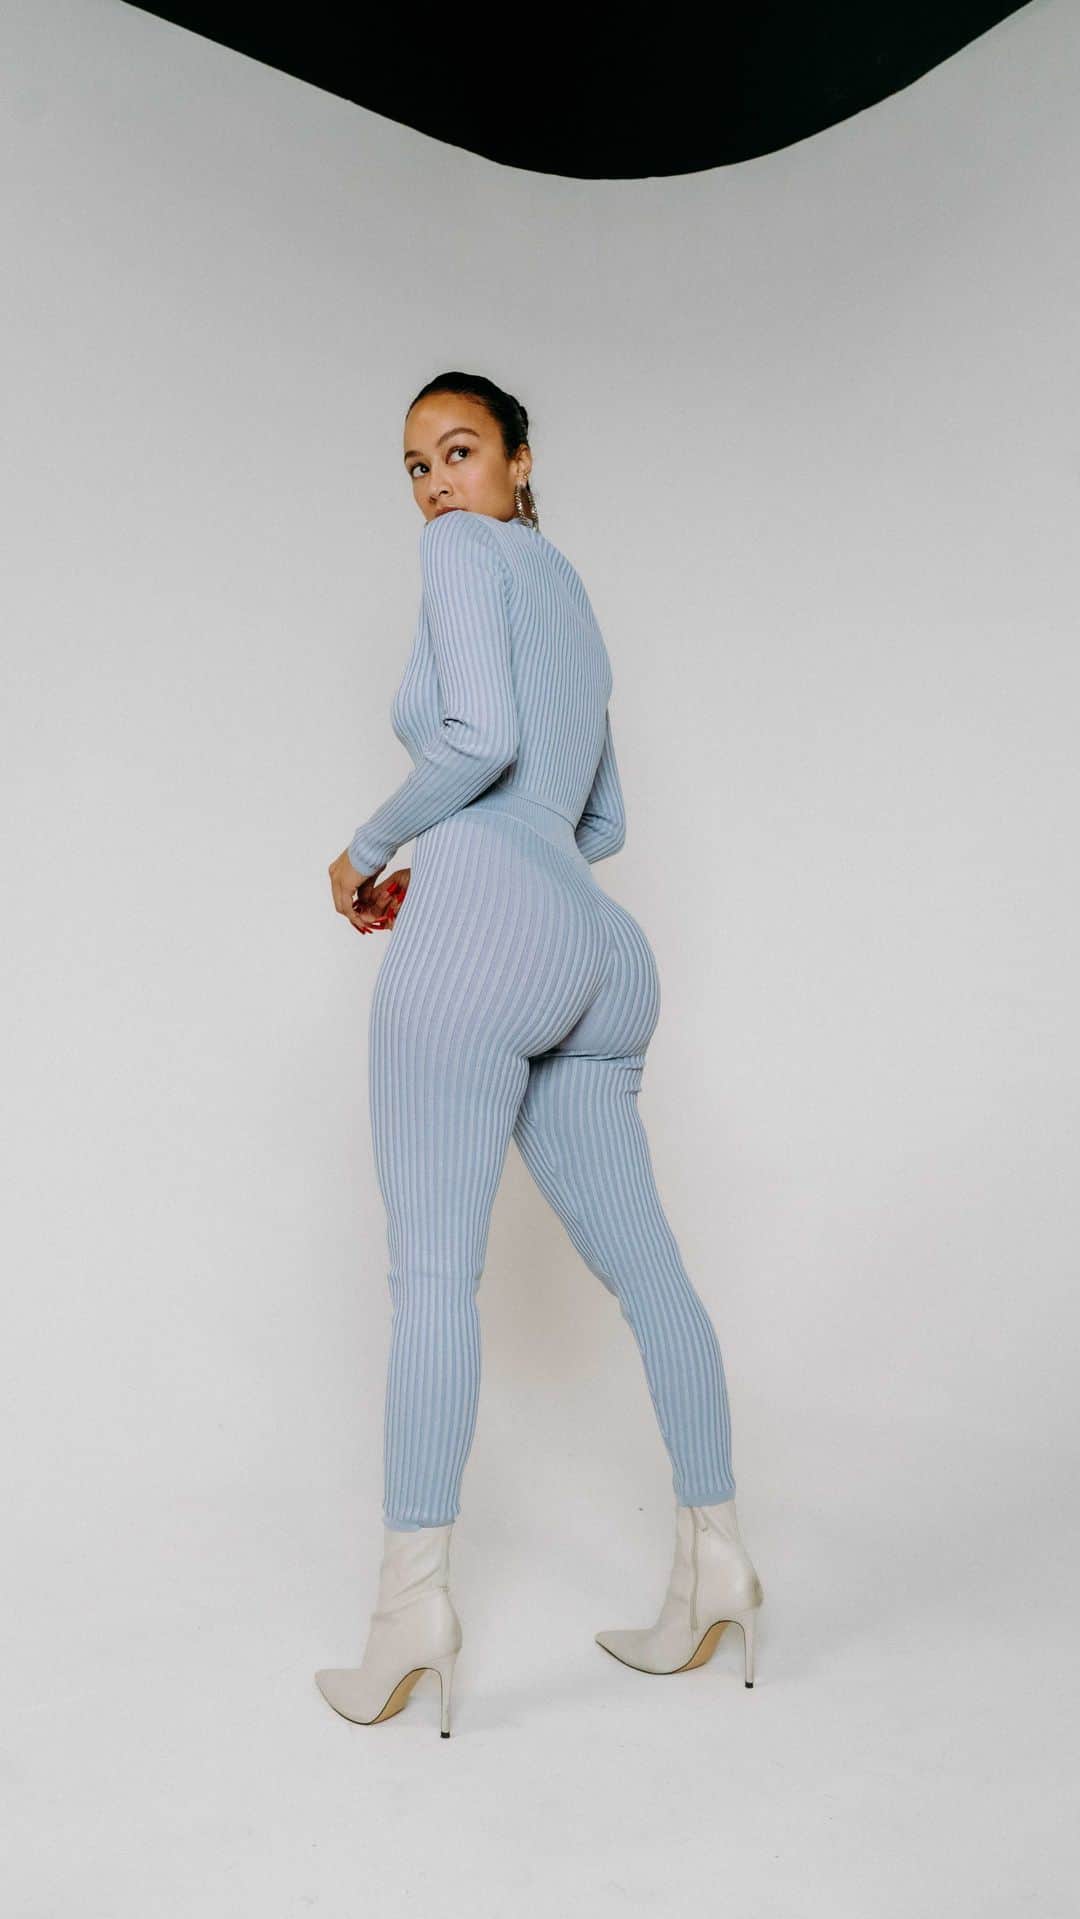 Draya Micheleのインスタグラム：「It’s @FashionNova ‘s BIGGEST SALE EVER... happening RN❗DON’T MISS 50% - 80% off EVERYTHING on the site! Follow @FashionNova and DON’T MISS OUT 👉www.FashionNova.com」